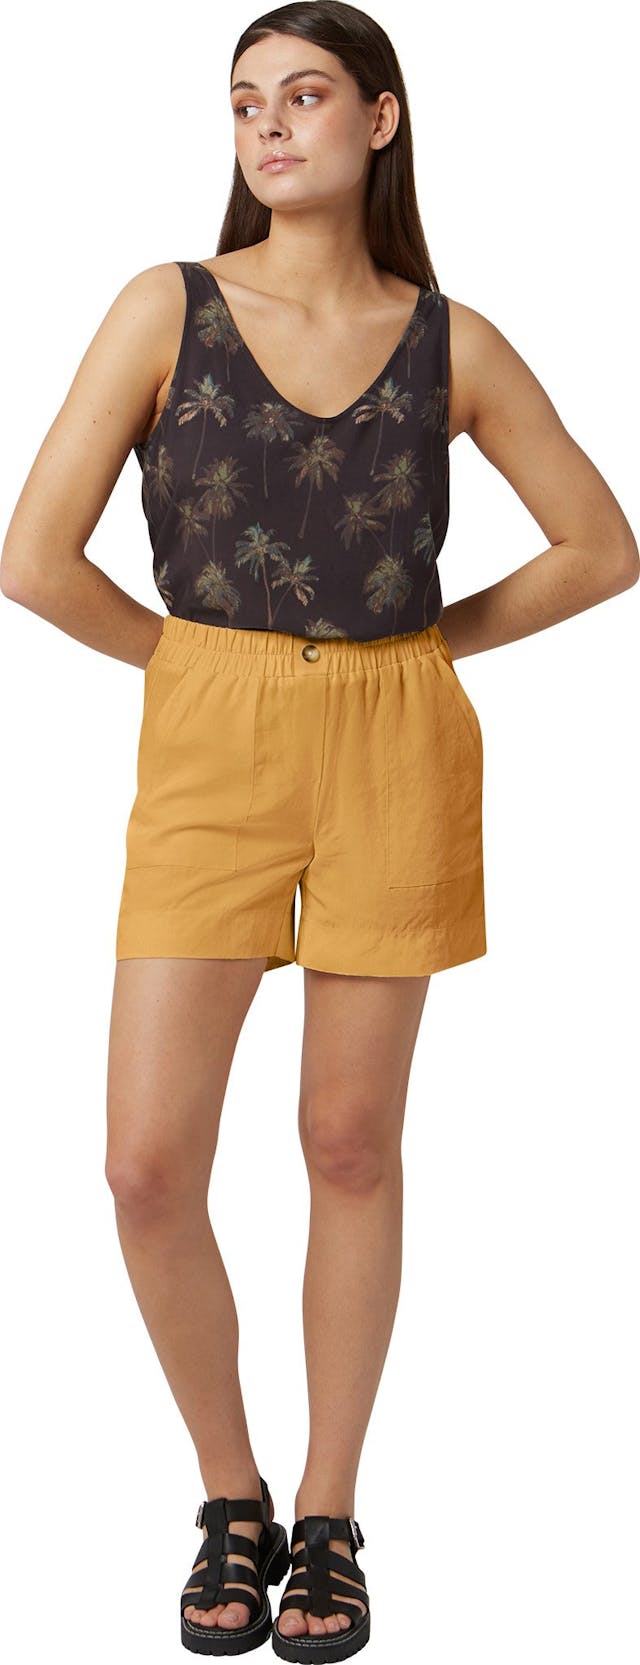 Product image for Stanley Short - Women's